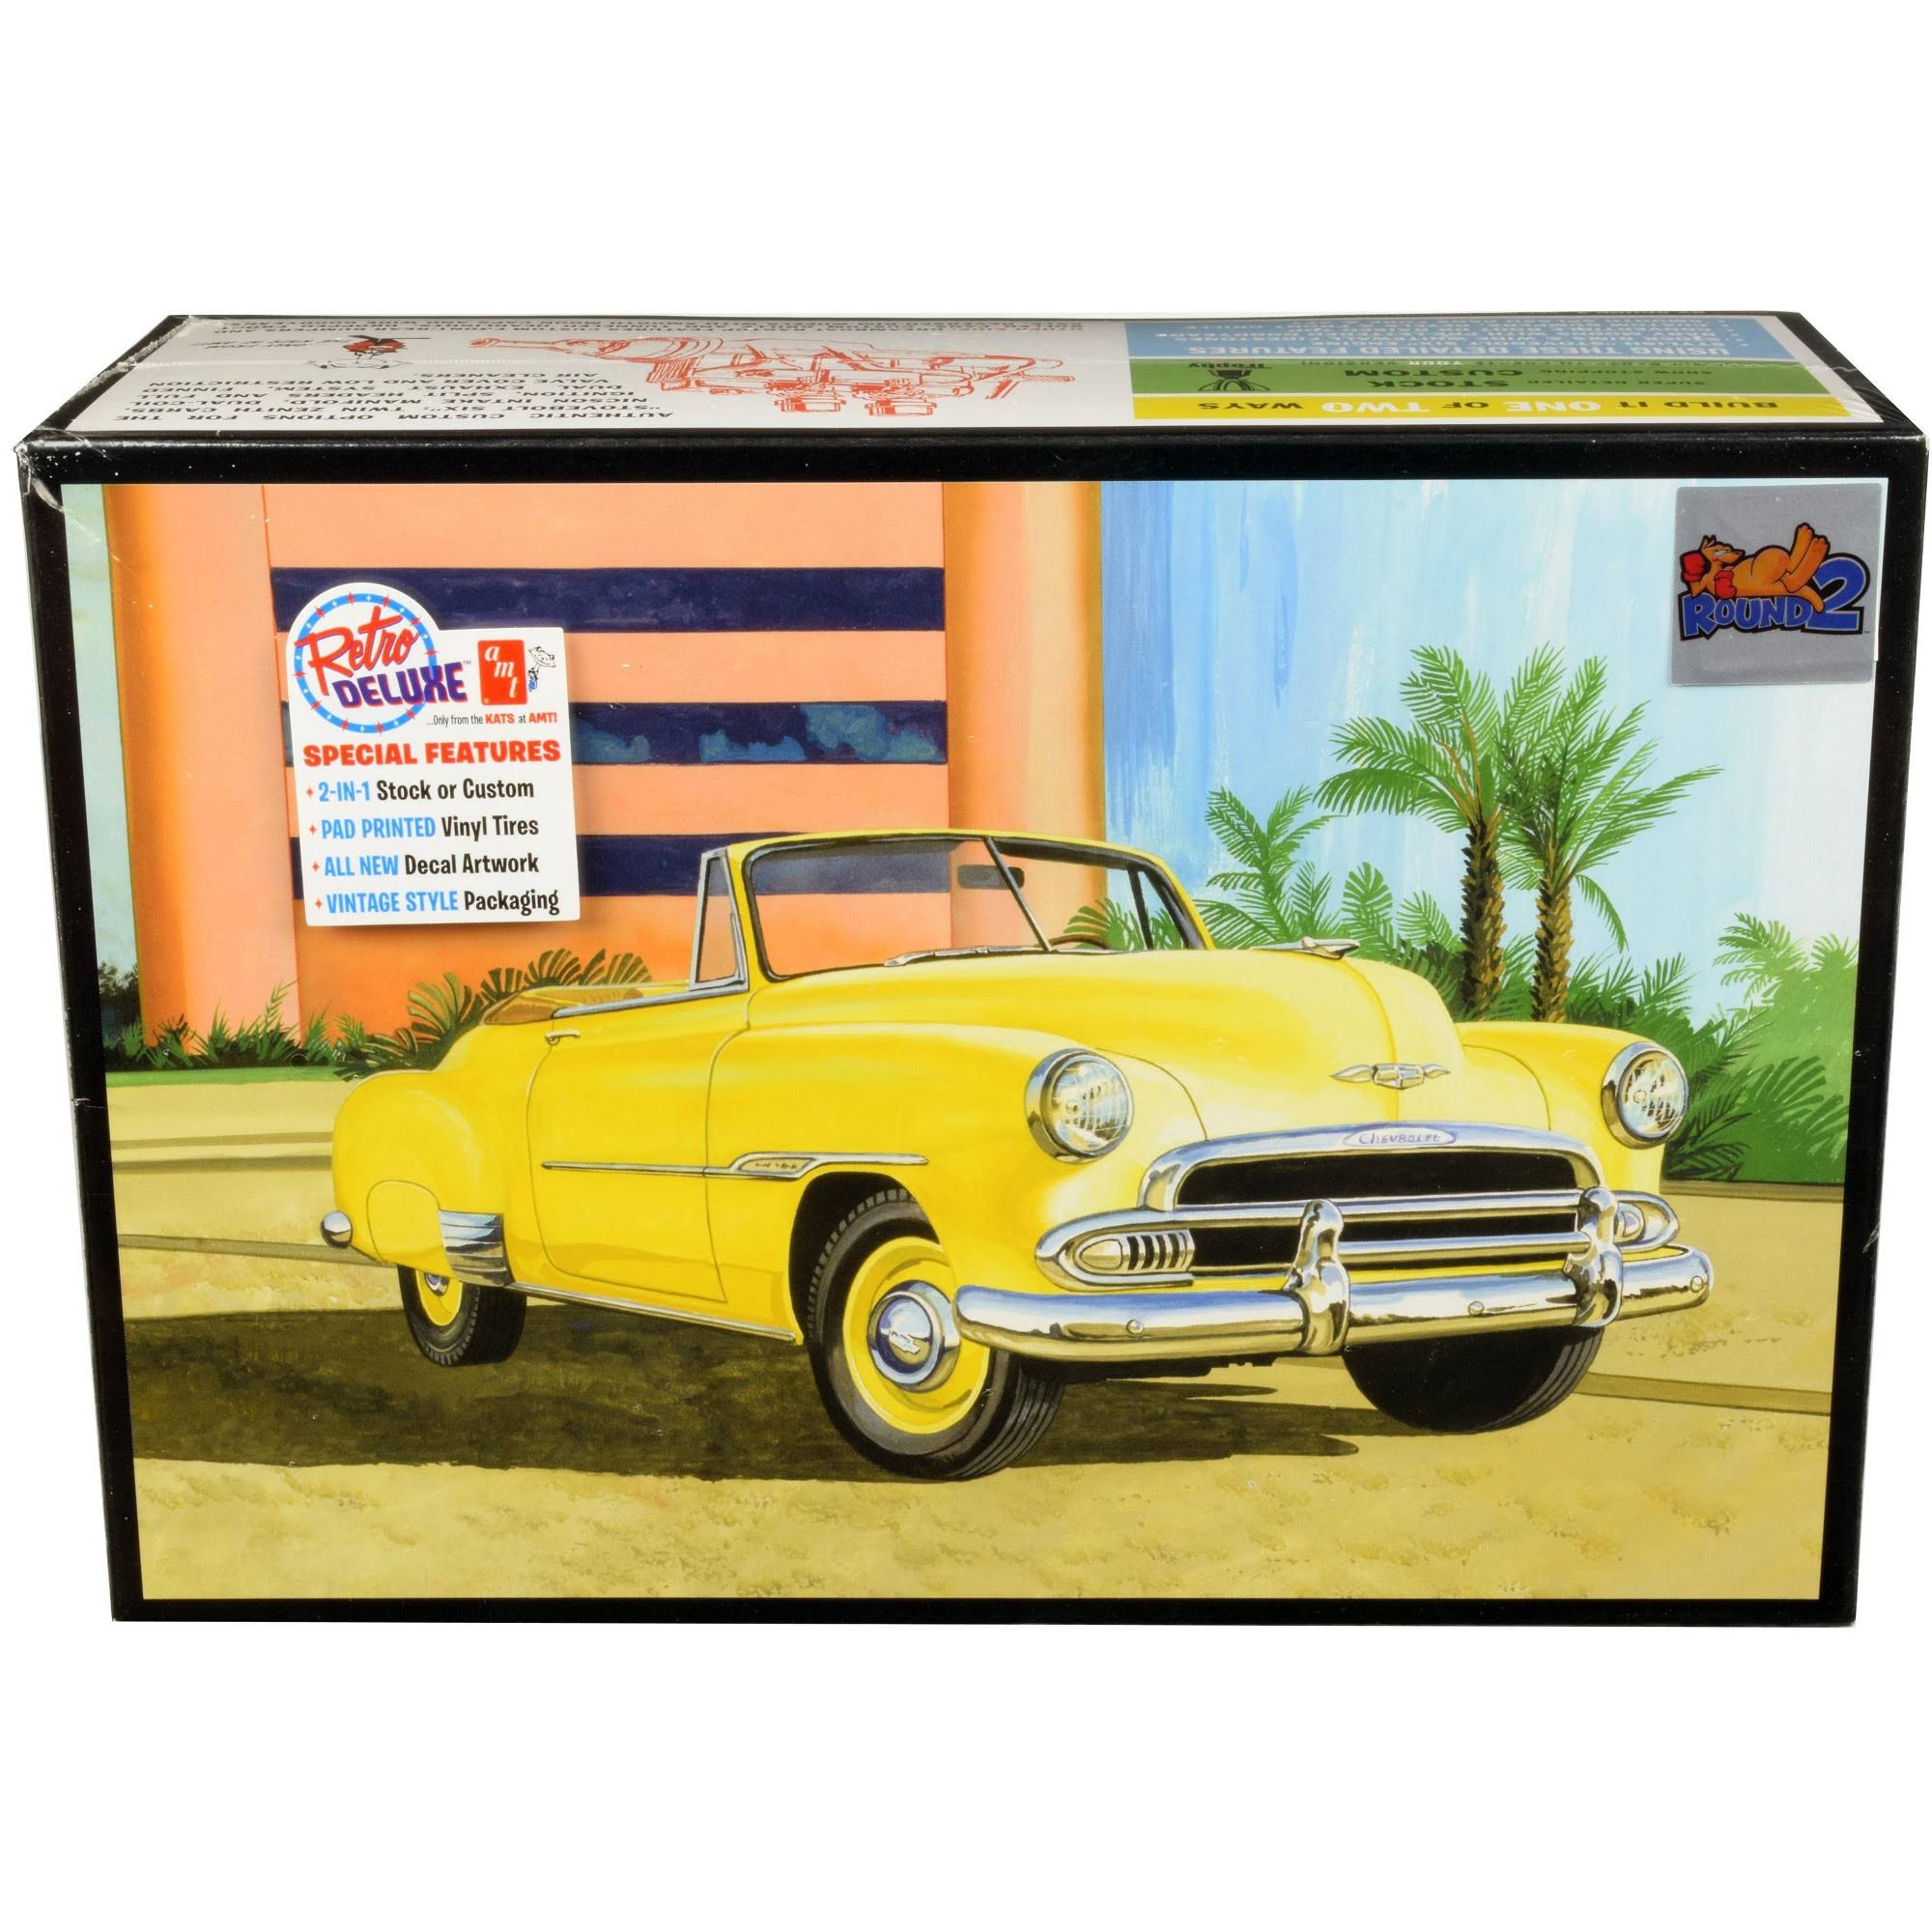 AMT 1951 Chevy Convertible Toy - 1/25 scale